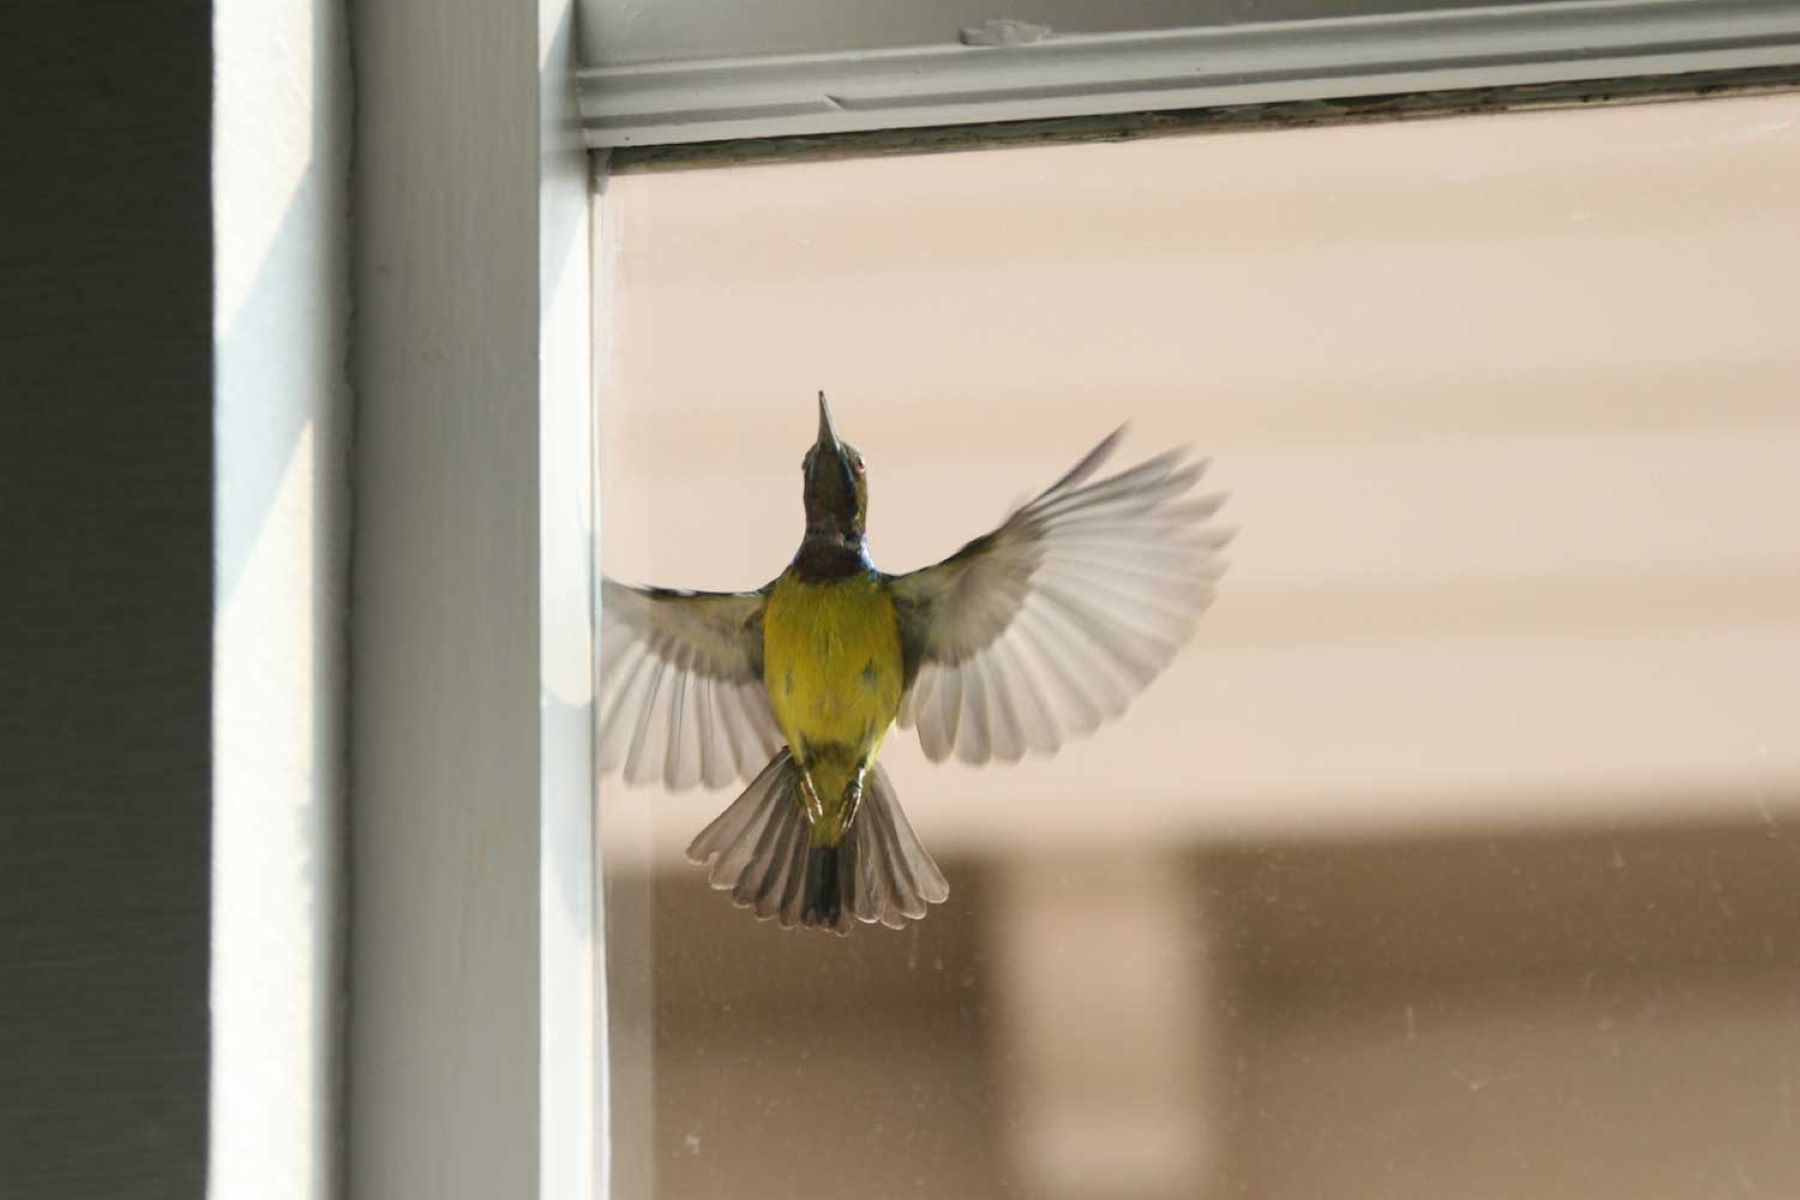 Bird Hits Window: A Sign Of Omen Or Mere Coincidence?